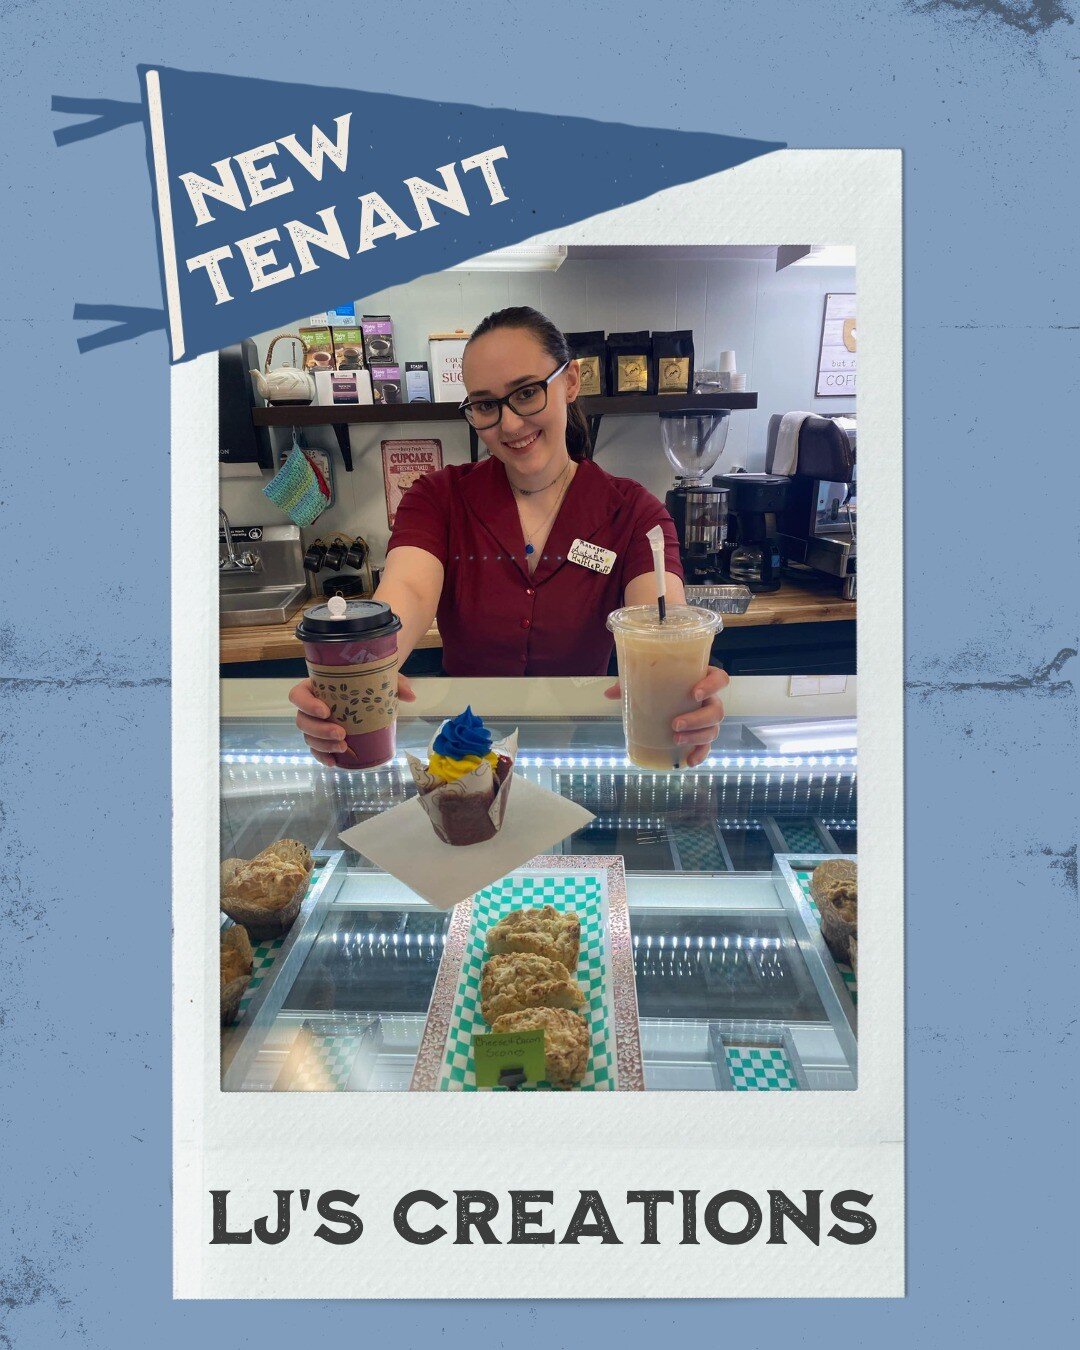 We are SO excited to welcome LJ&rsquo;S Creations to The Six Twenty family! We're already daydreaming of freshly brewed coffee and every homemade baked treat you could imagine... 😍

#TheSixTwentyatBedford #bedfordliving #bedfordvirginia #visitbedfor